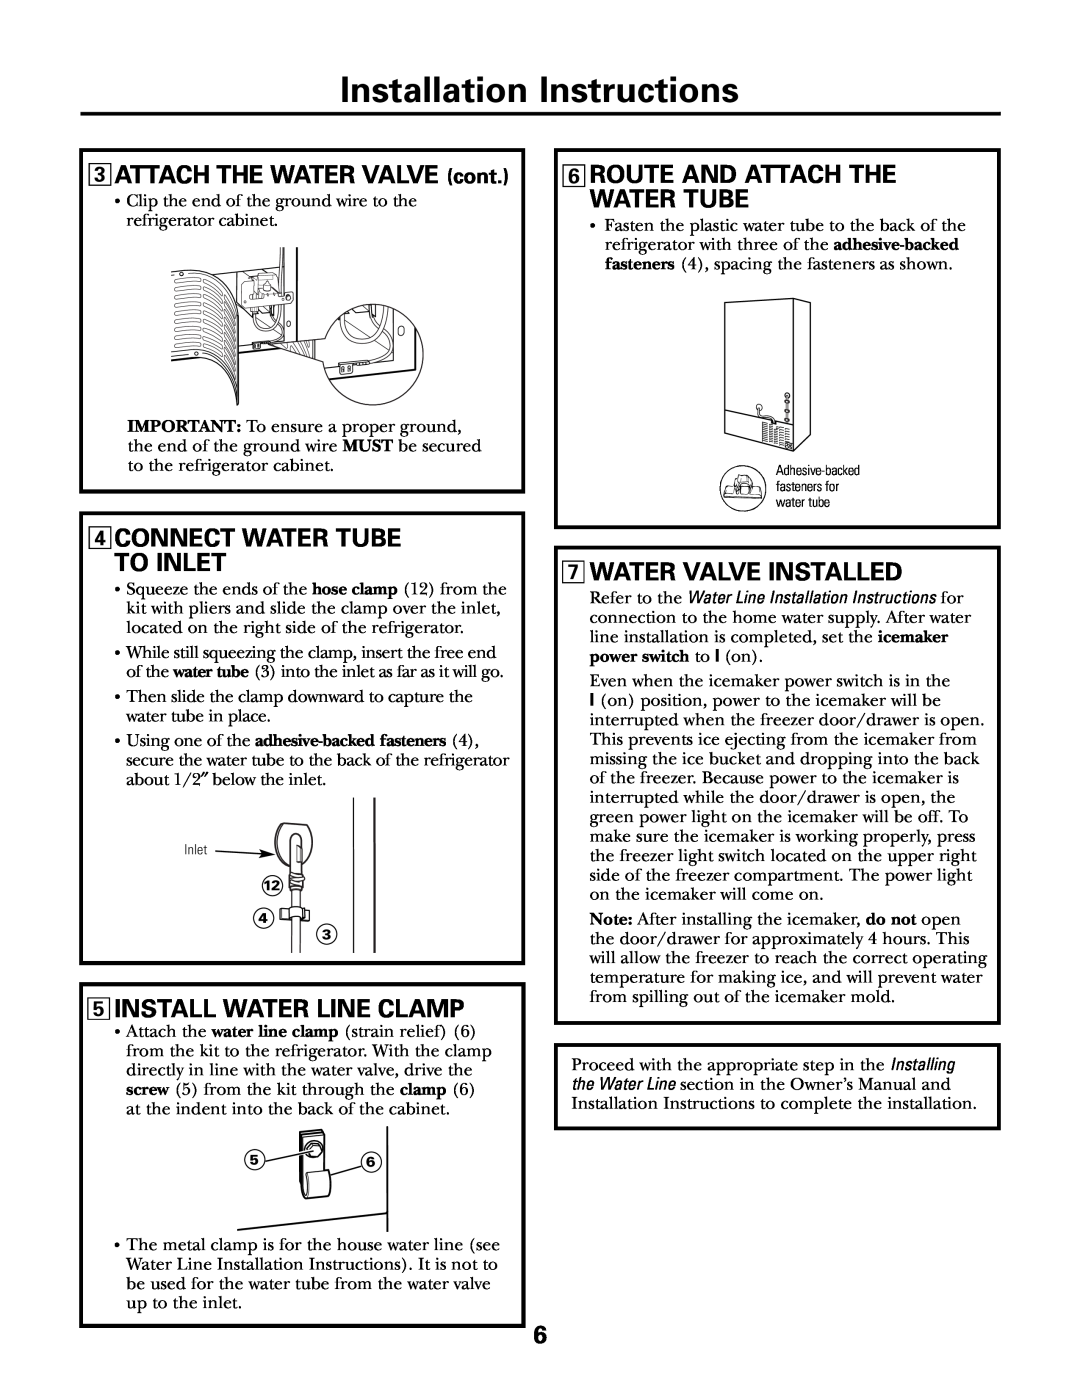 GE GBS22HB Installation Instructions, Connect Water Tube To Inlet, Install Water Line Clamp, Water Valve Installed 